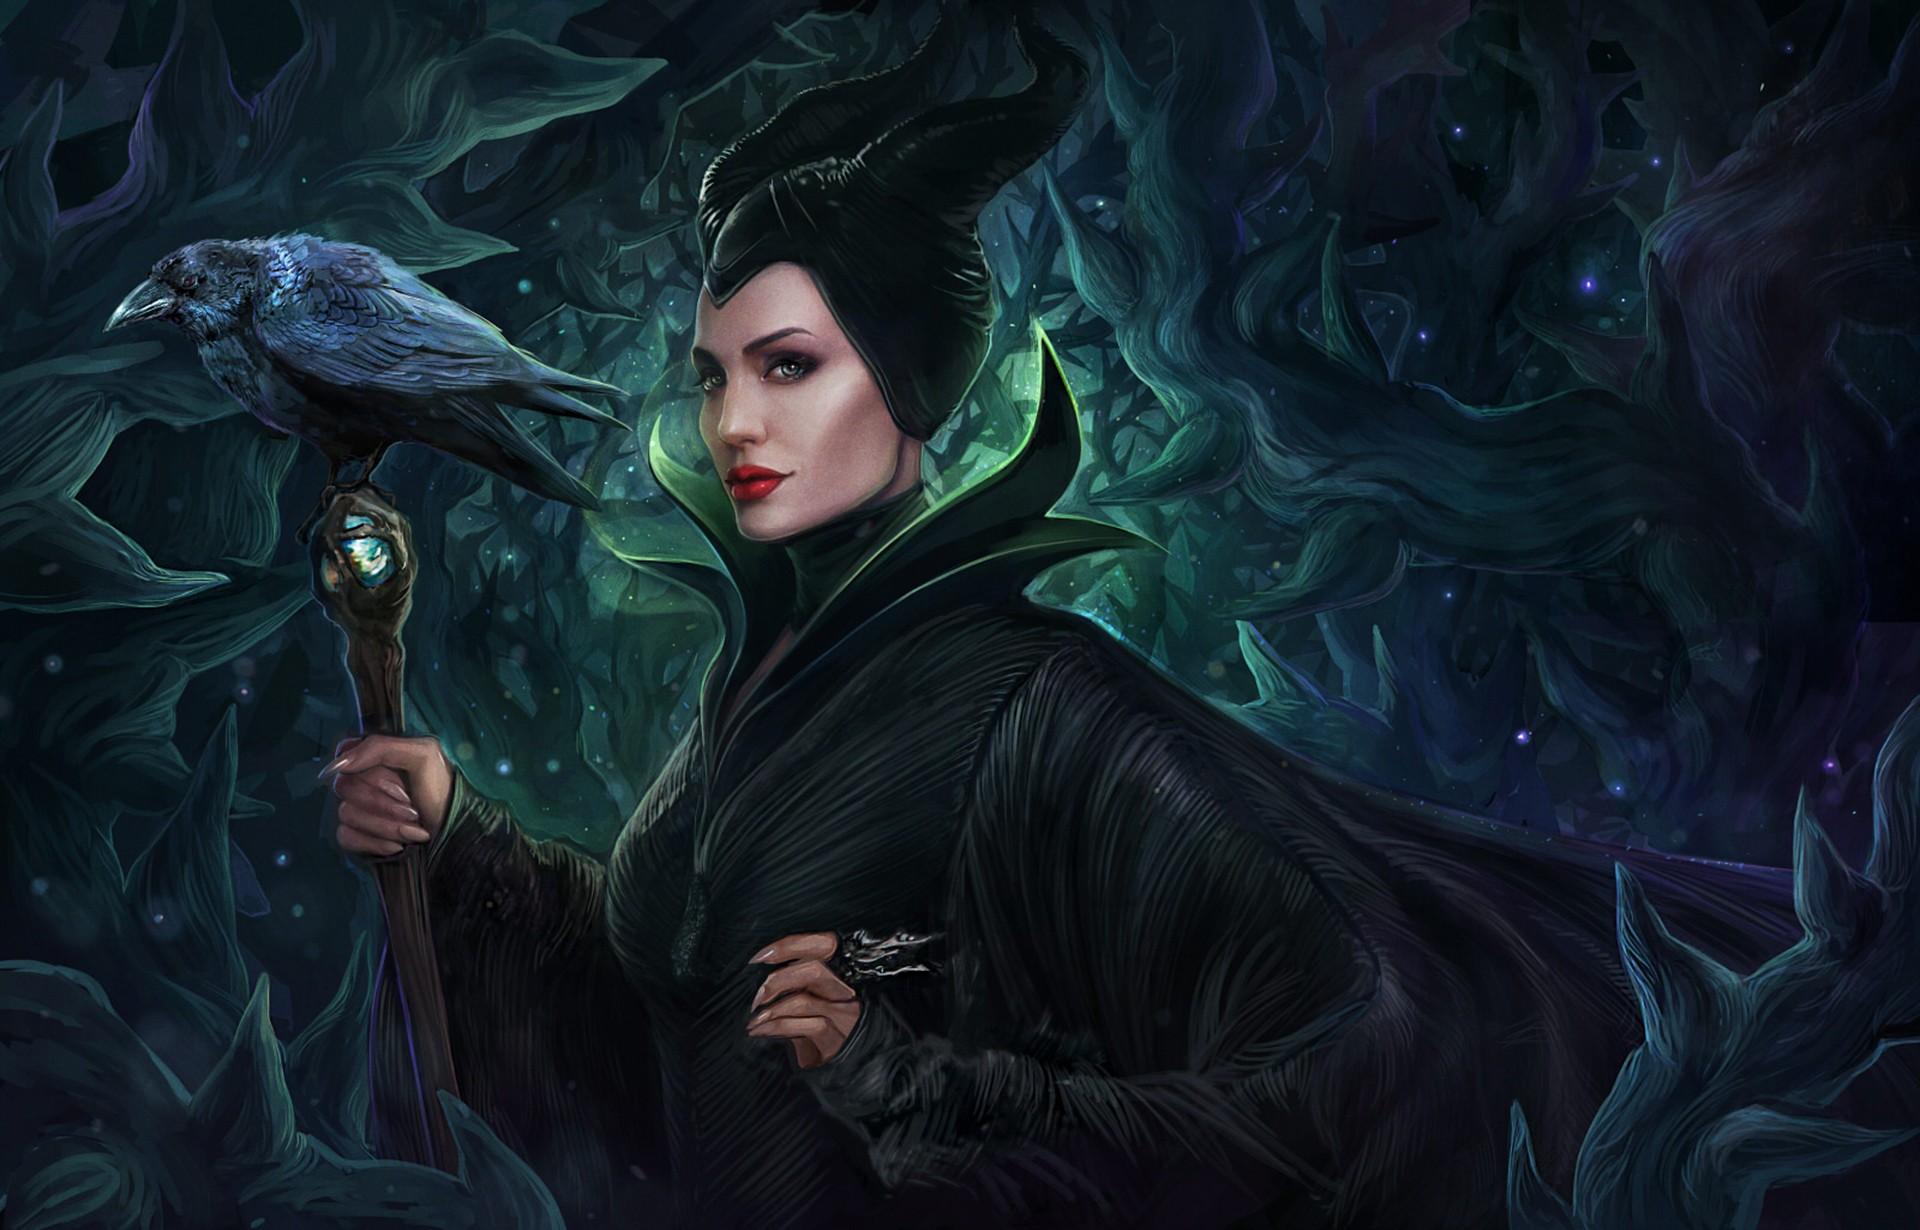 Angelina Jolie in Maleficent HD Wallpaper. Background Image